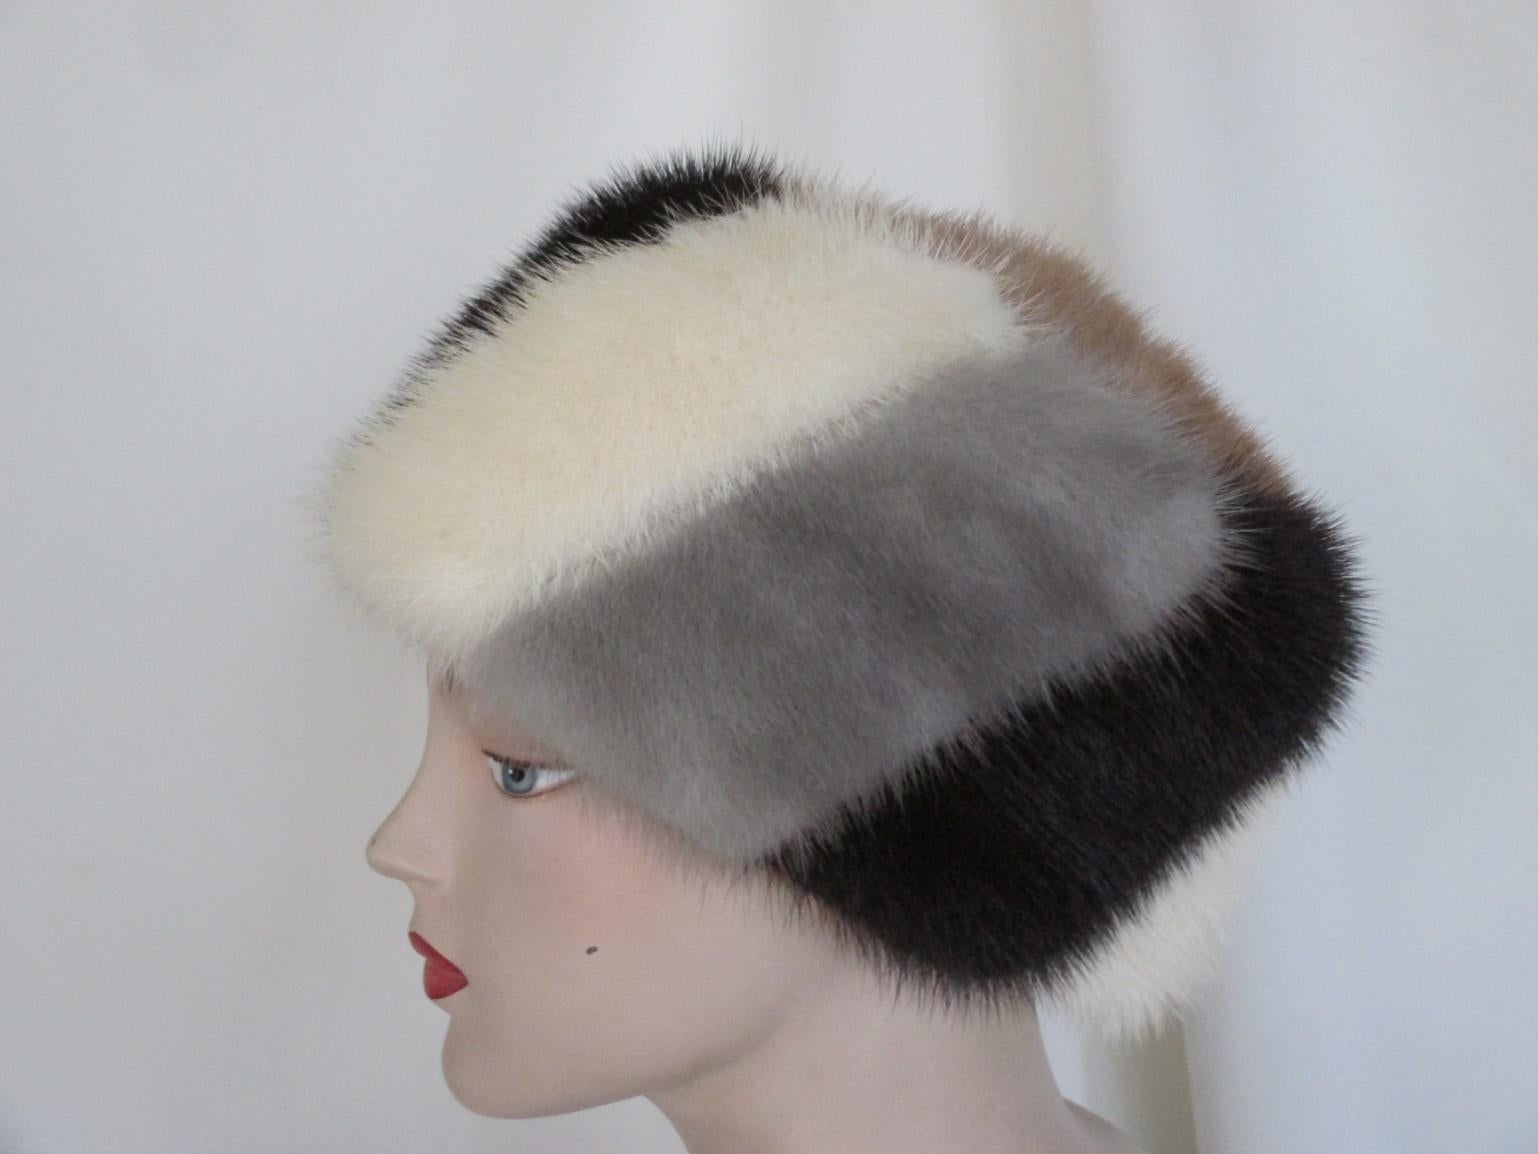 This mink fur hat is made in 4 different colors of soft and supple mink.
Its in pre-owned vintage condition.
Not lined
Circumference about 57 / 58 cm -  22.44/ 22.83 inch

Please note that vintage items are not new and therefore might have minor